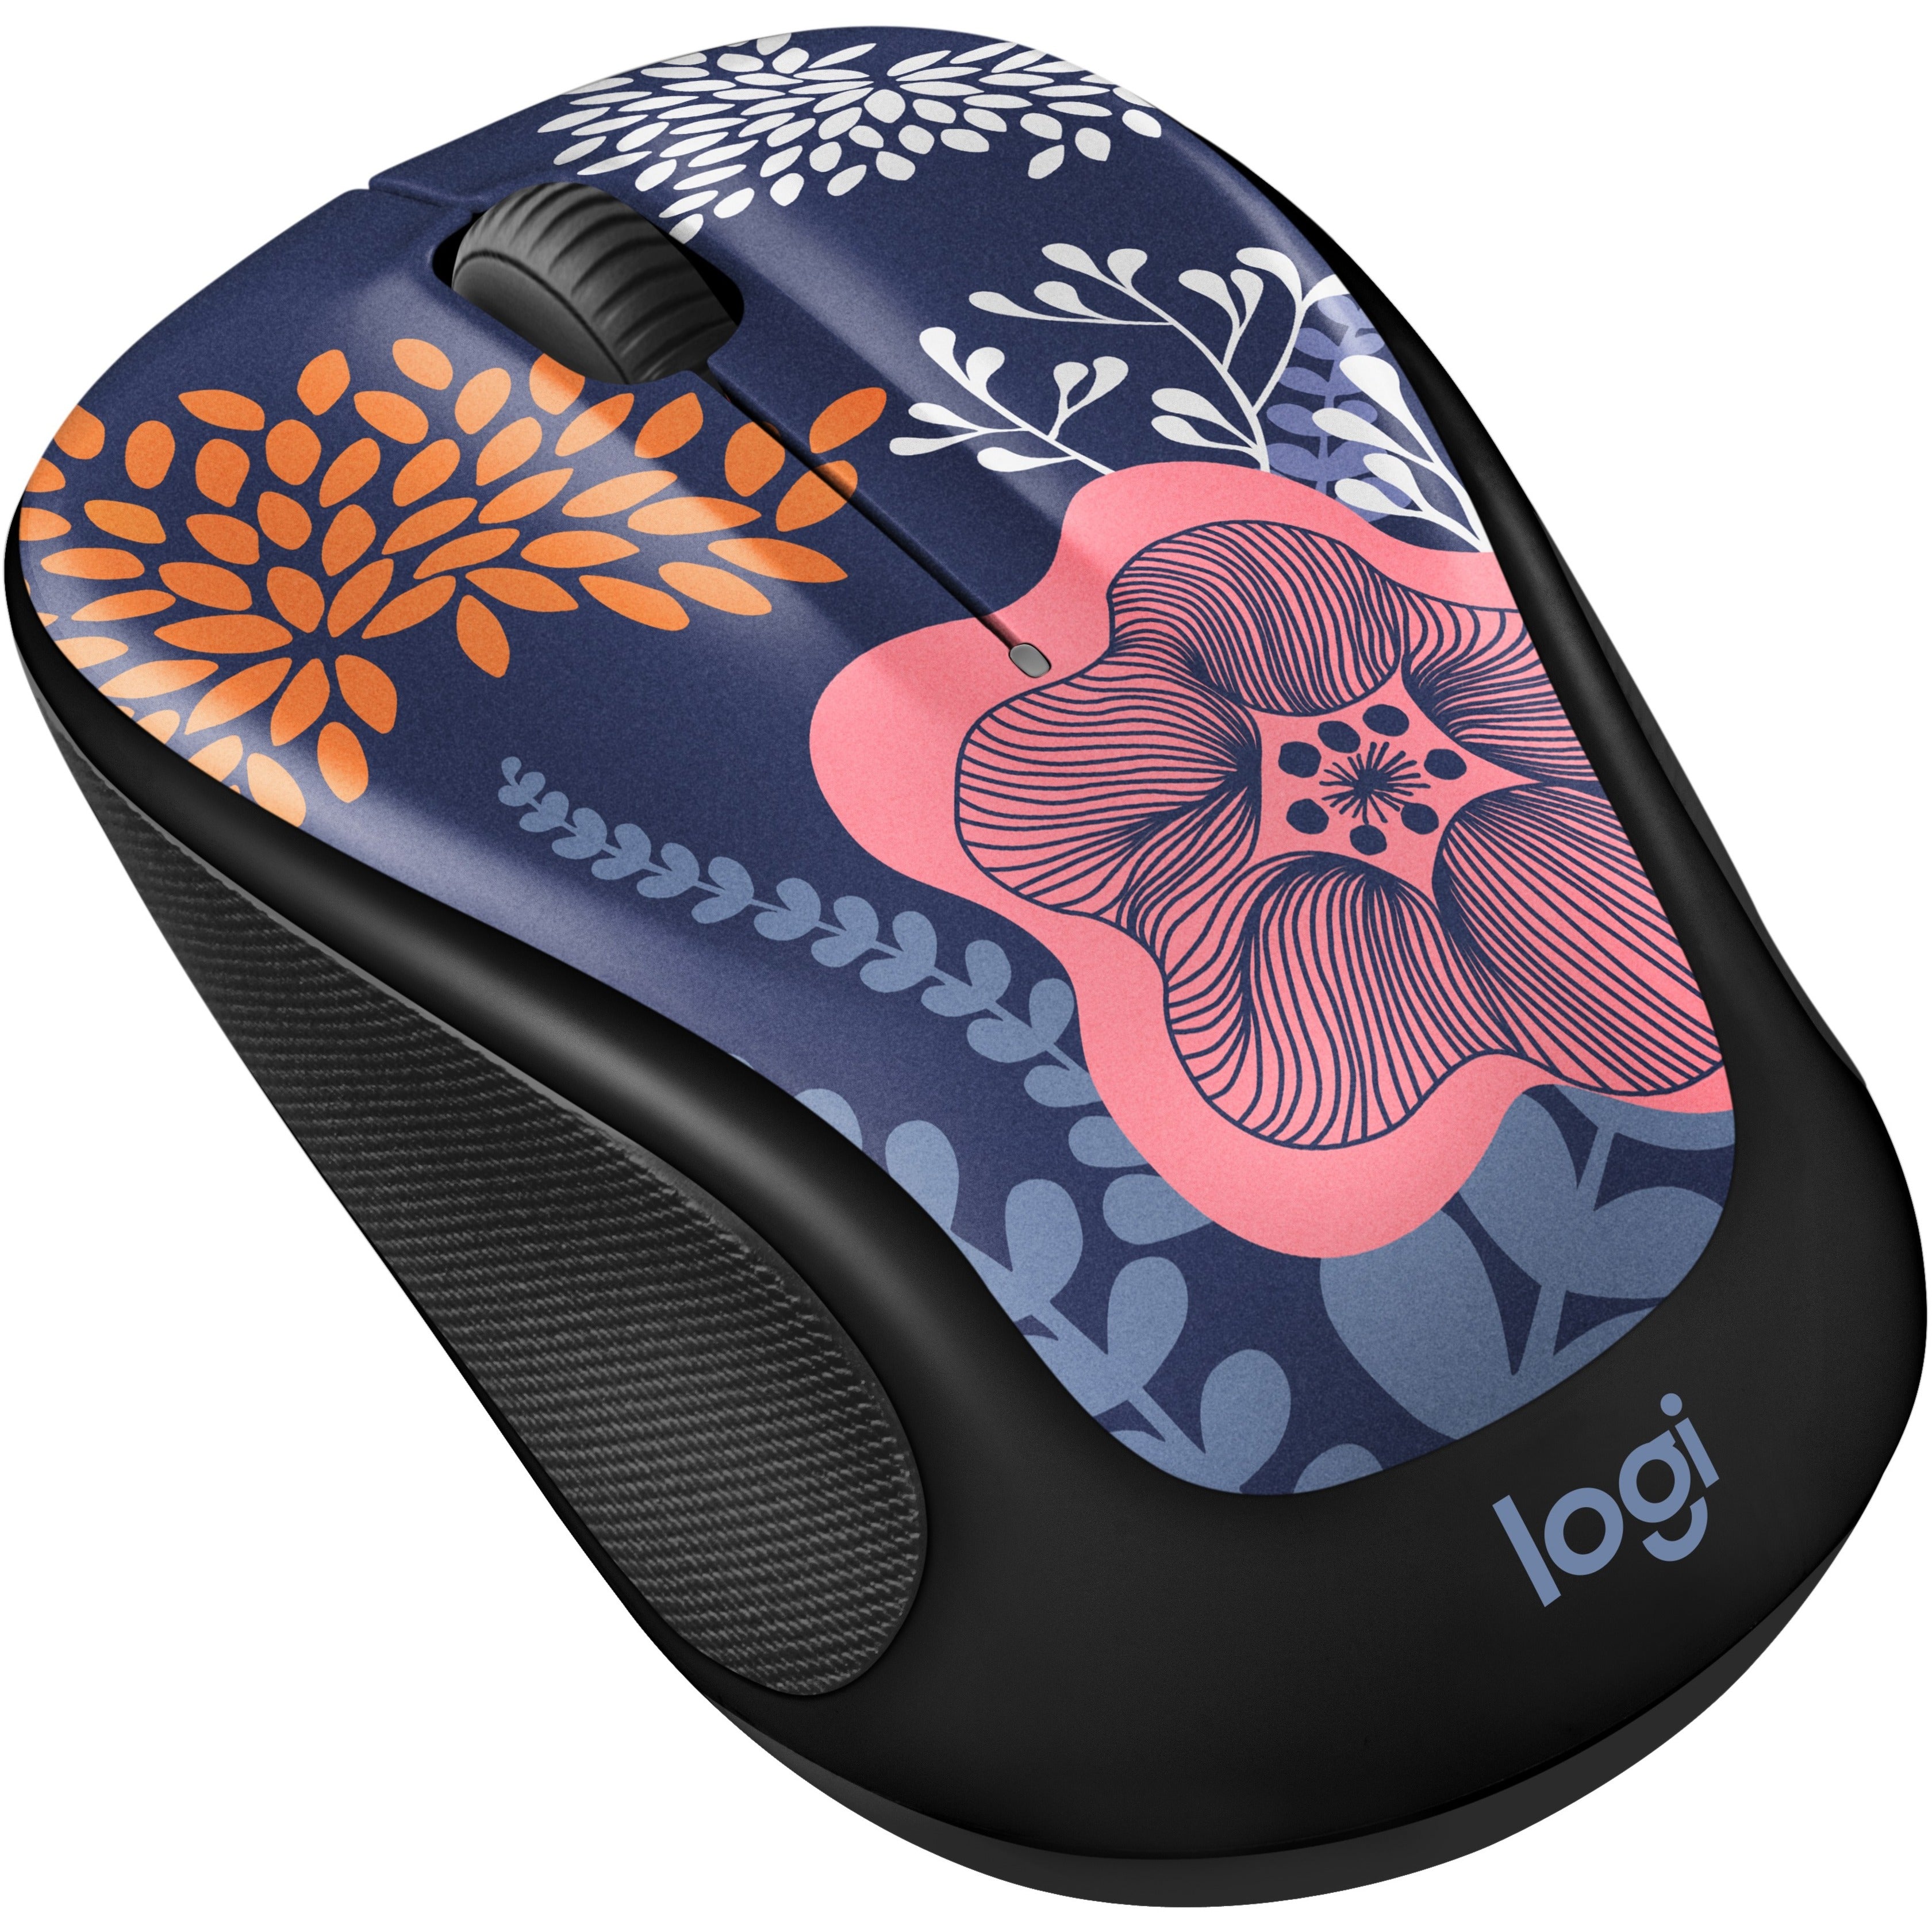 Logitech 910-006552 Design Collection Limited Edition Wireless Mouse, Forest Floral, Small Size, 2.4 GHz Wireless Technology